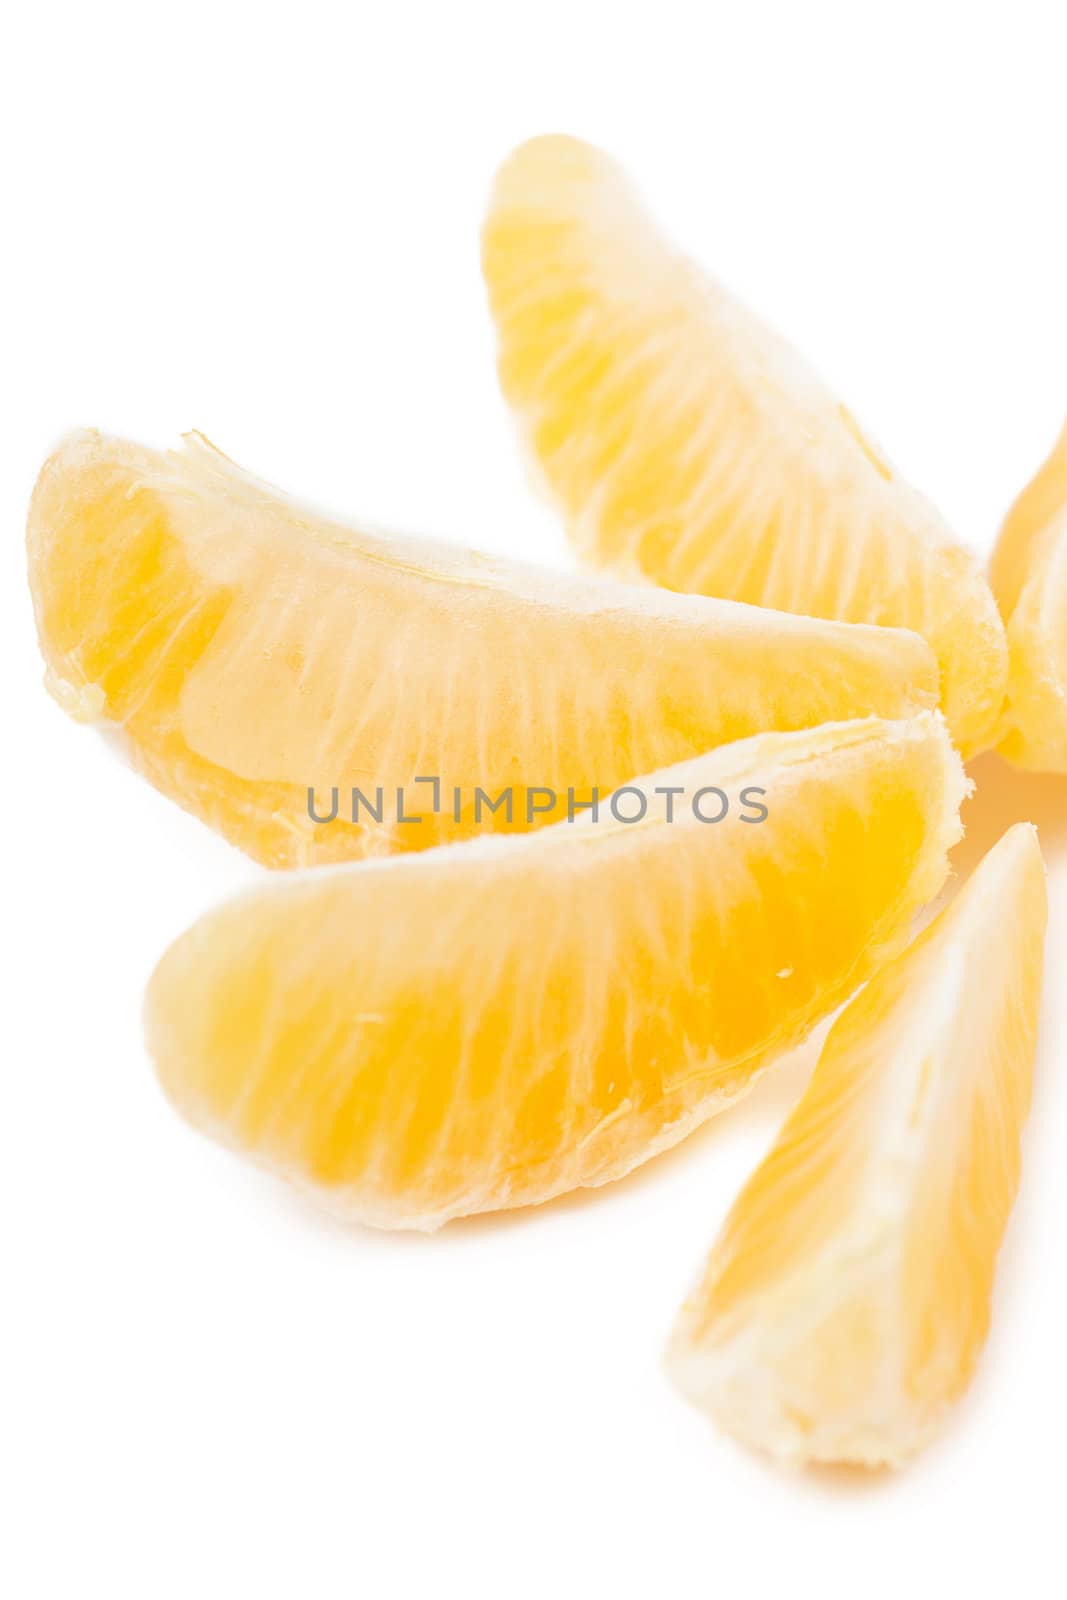 Closeup view of tangerine sections isolated on the white